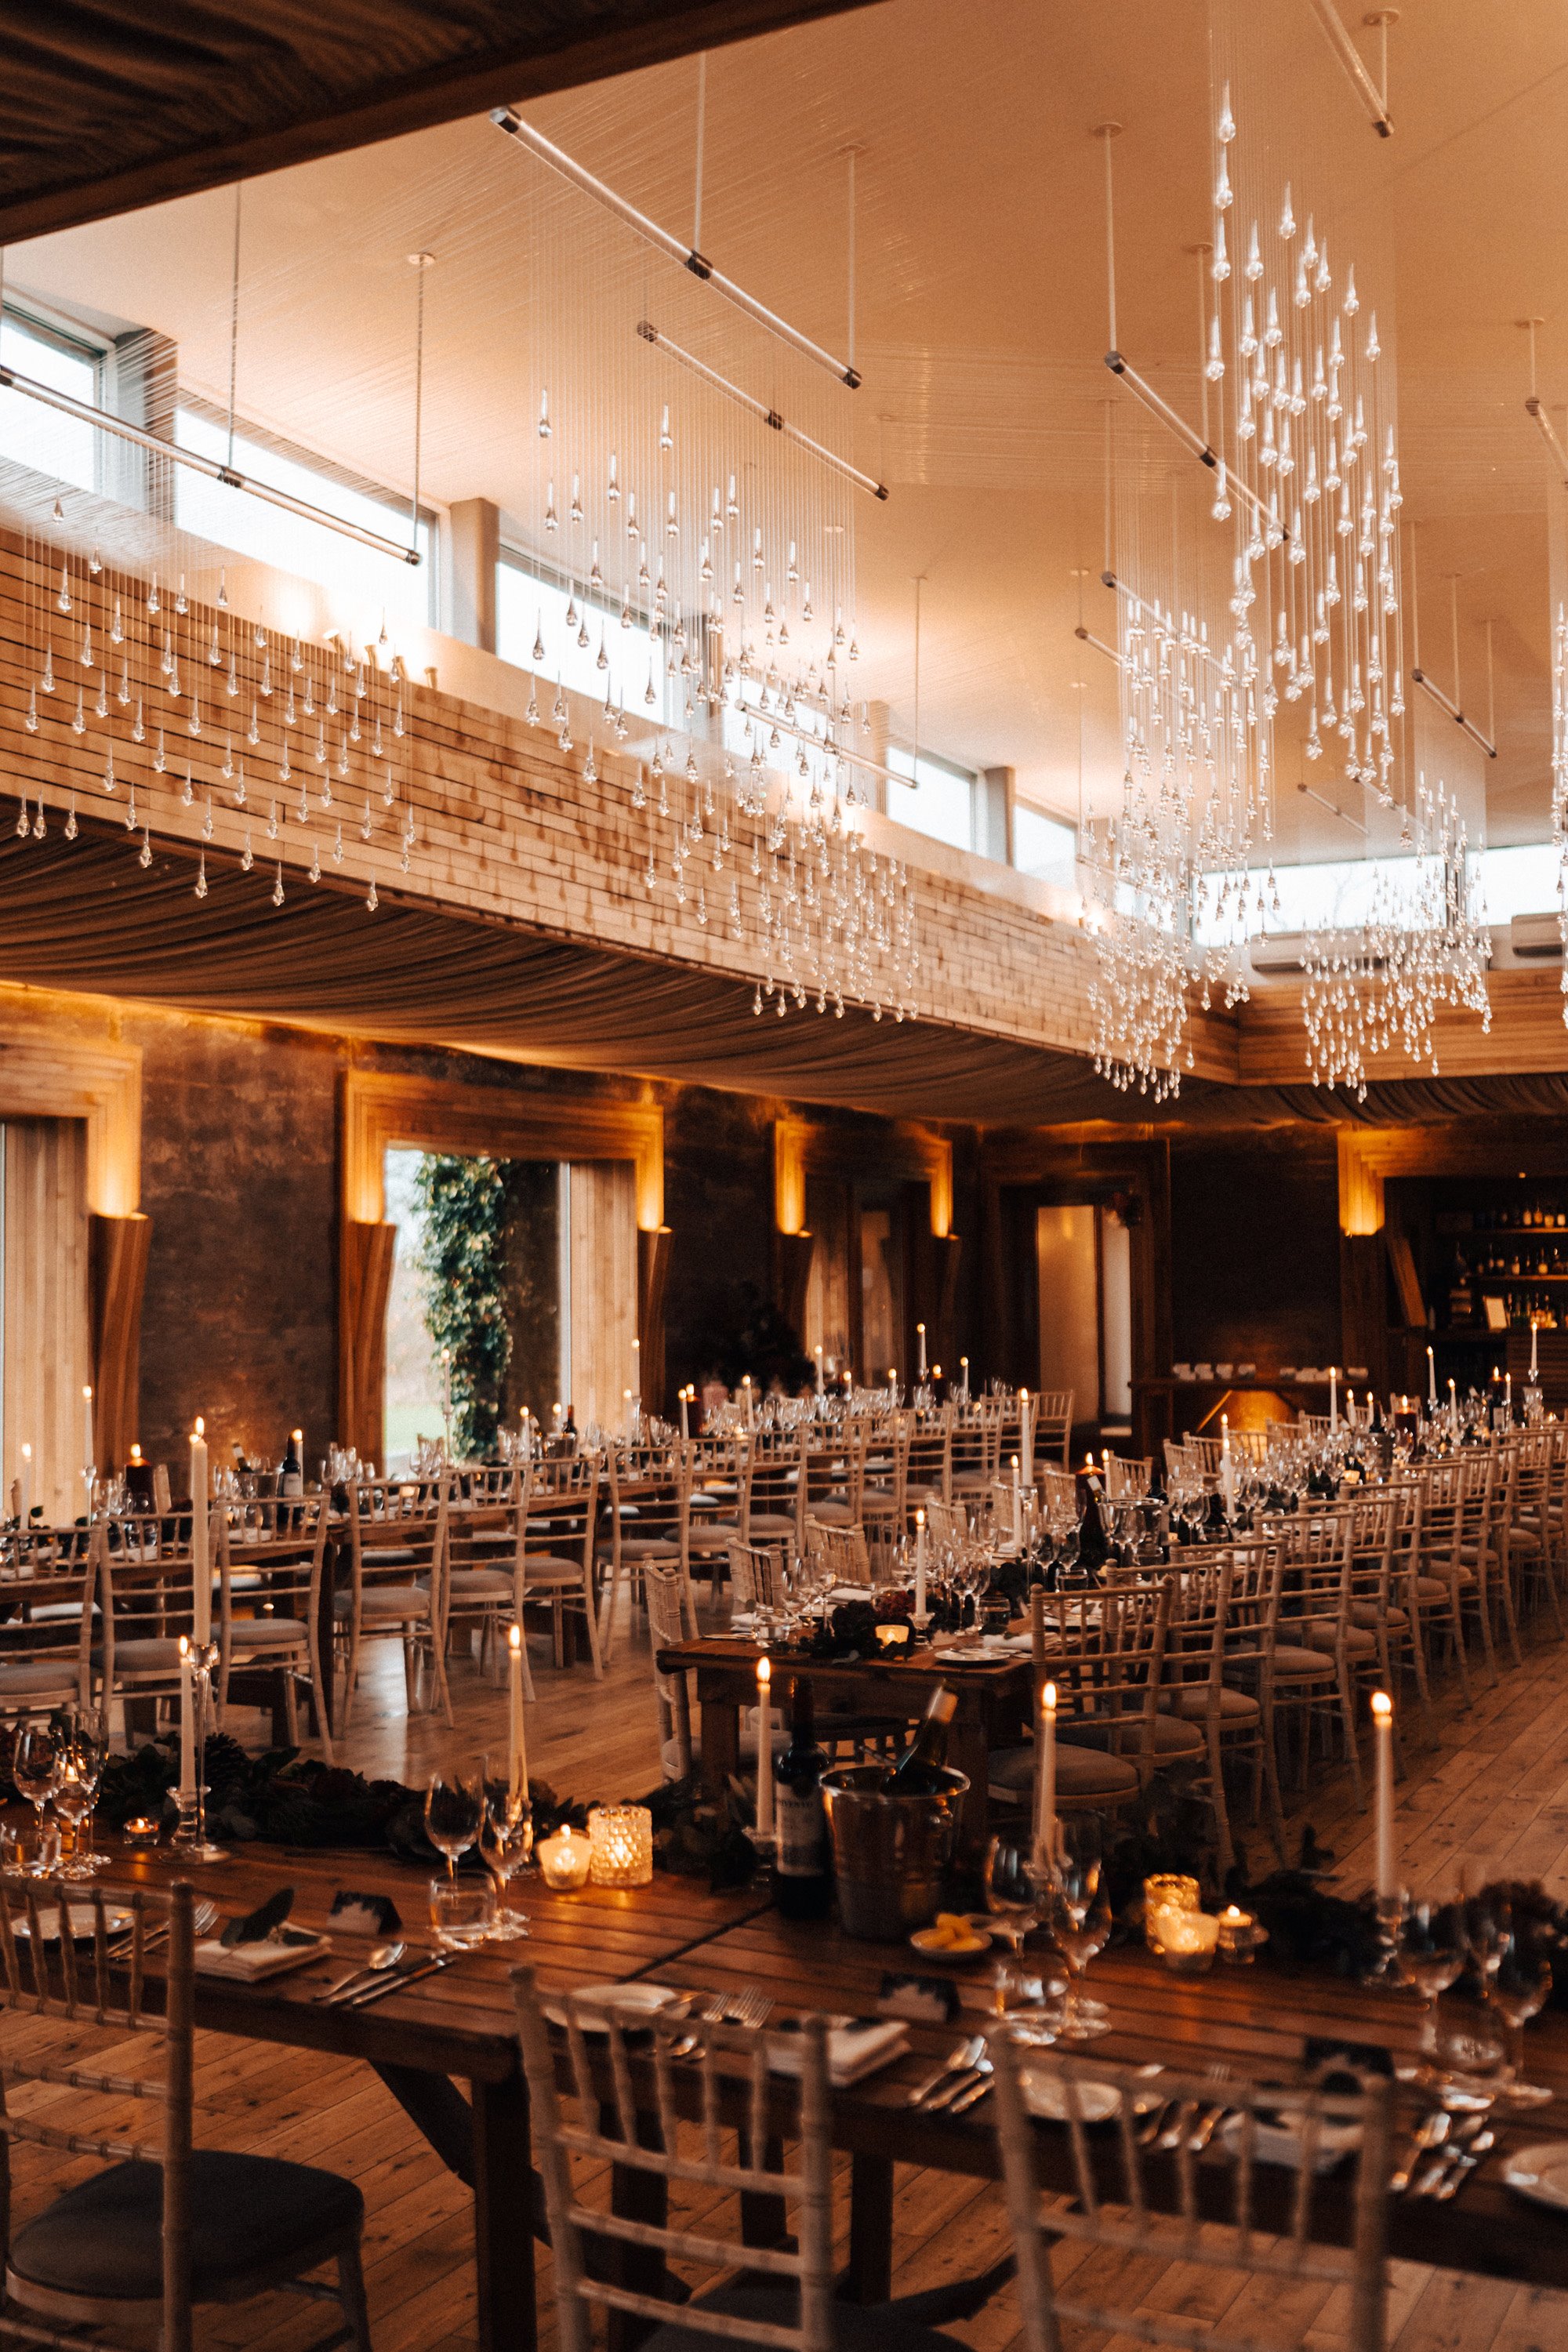 Winter wonderland wedding reception with hundreds of candles and twinkling lights in the cotswolds